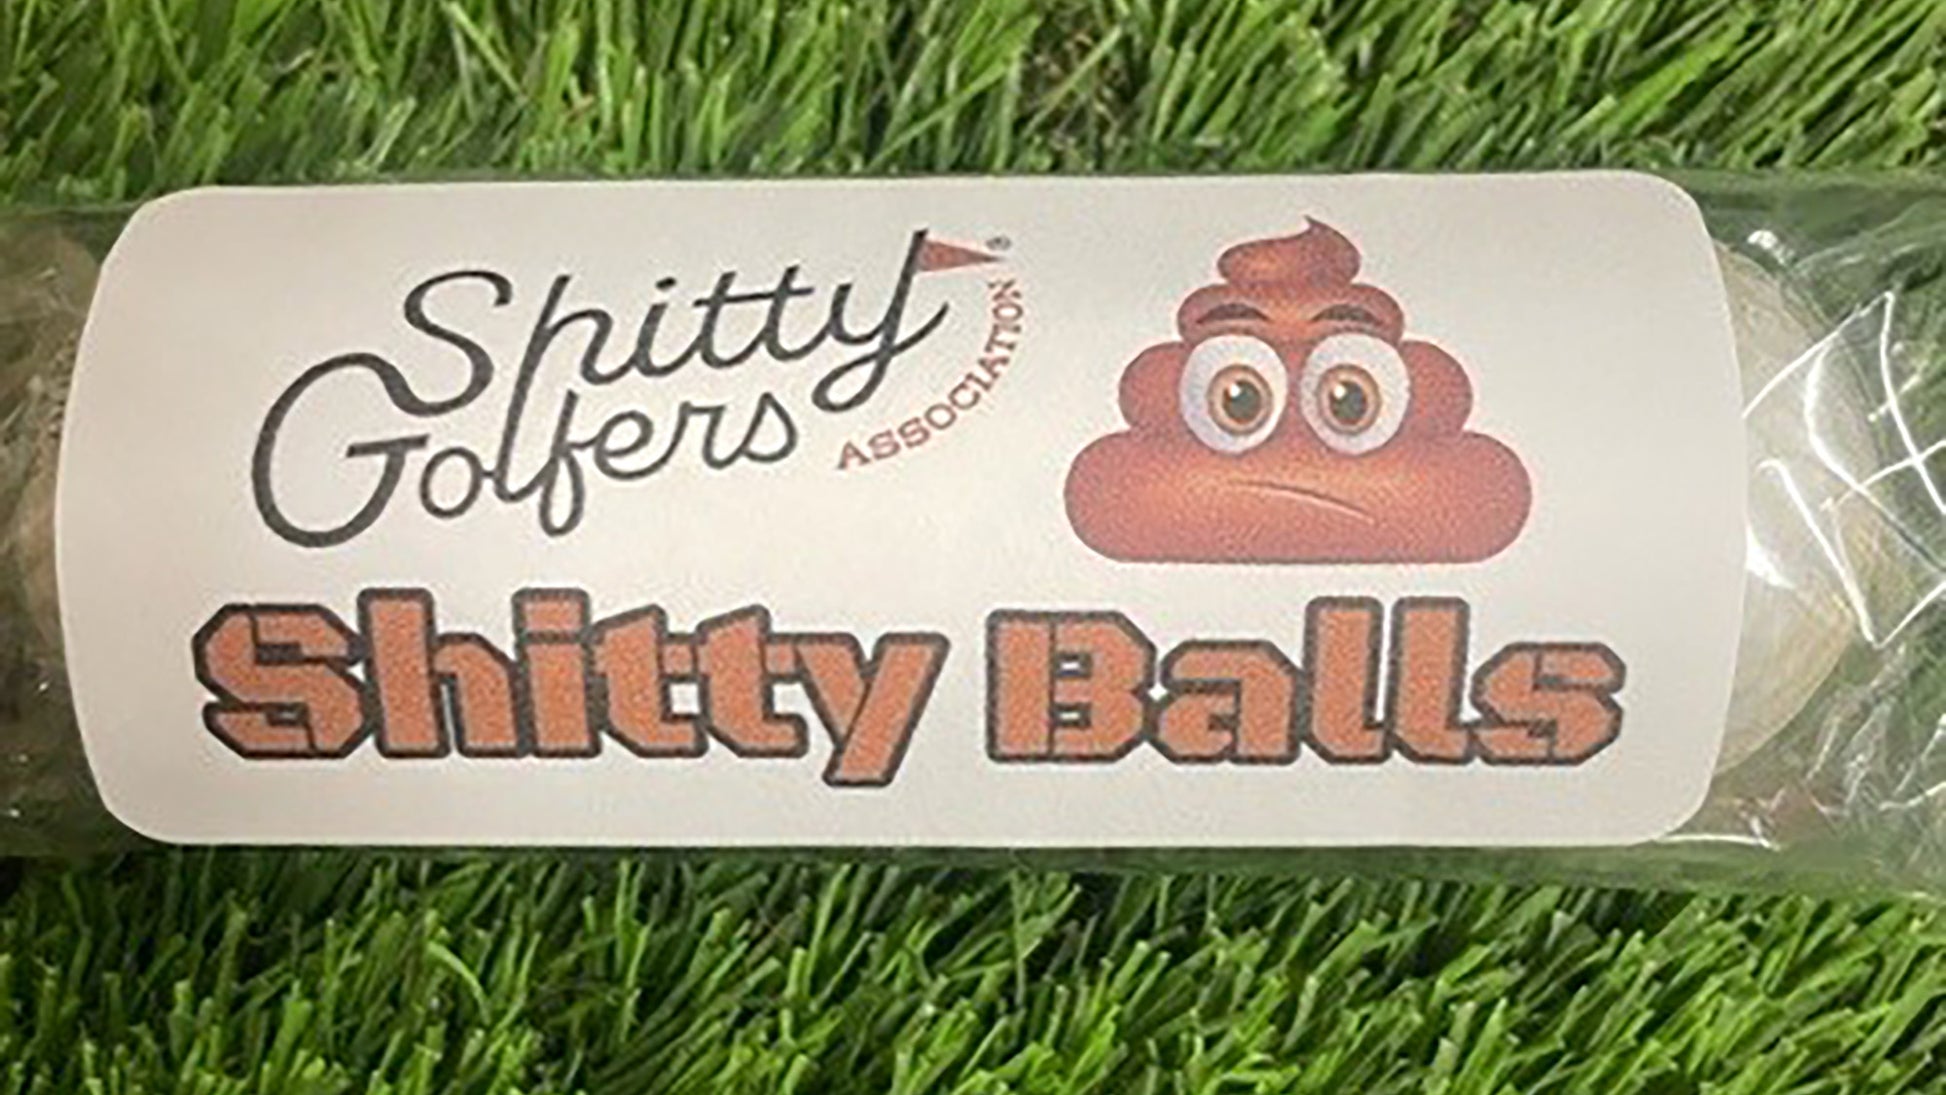 Gears Out Crappy Golf Balls for a Crappy Golfer – Funny Gag Gifts for  Golfers Guaranteed NOT to Improve Your Golf Game Includes 6 Golf Balls  Novelty